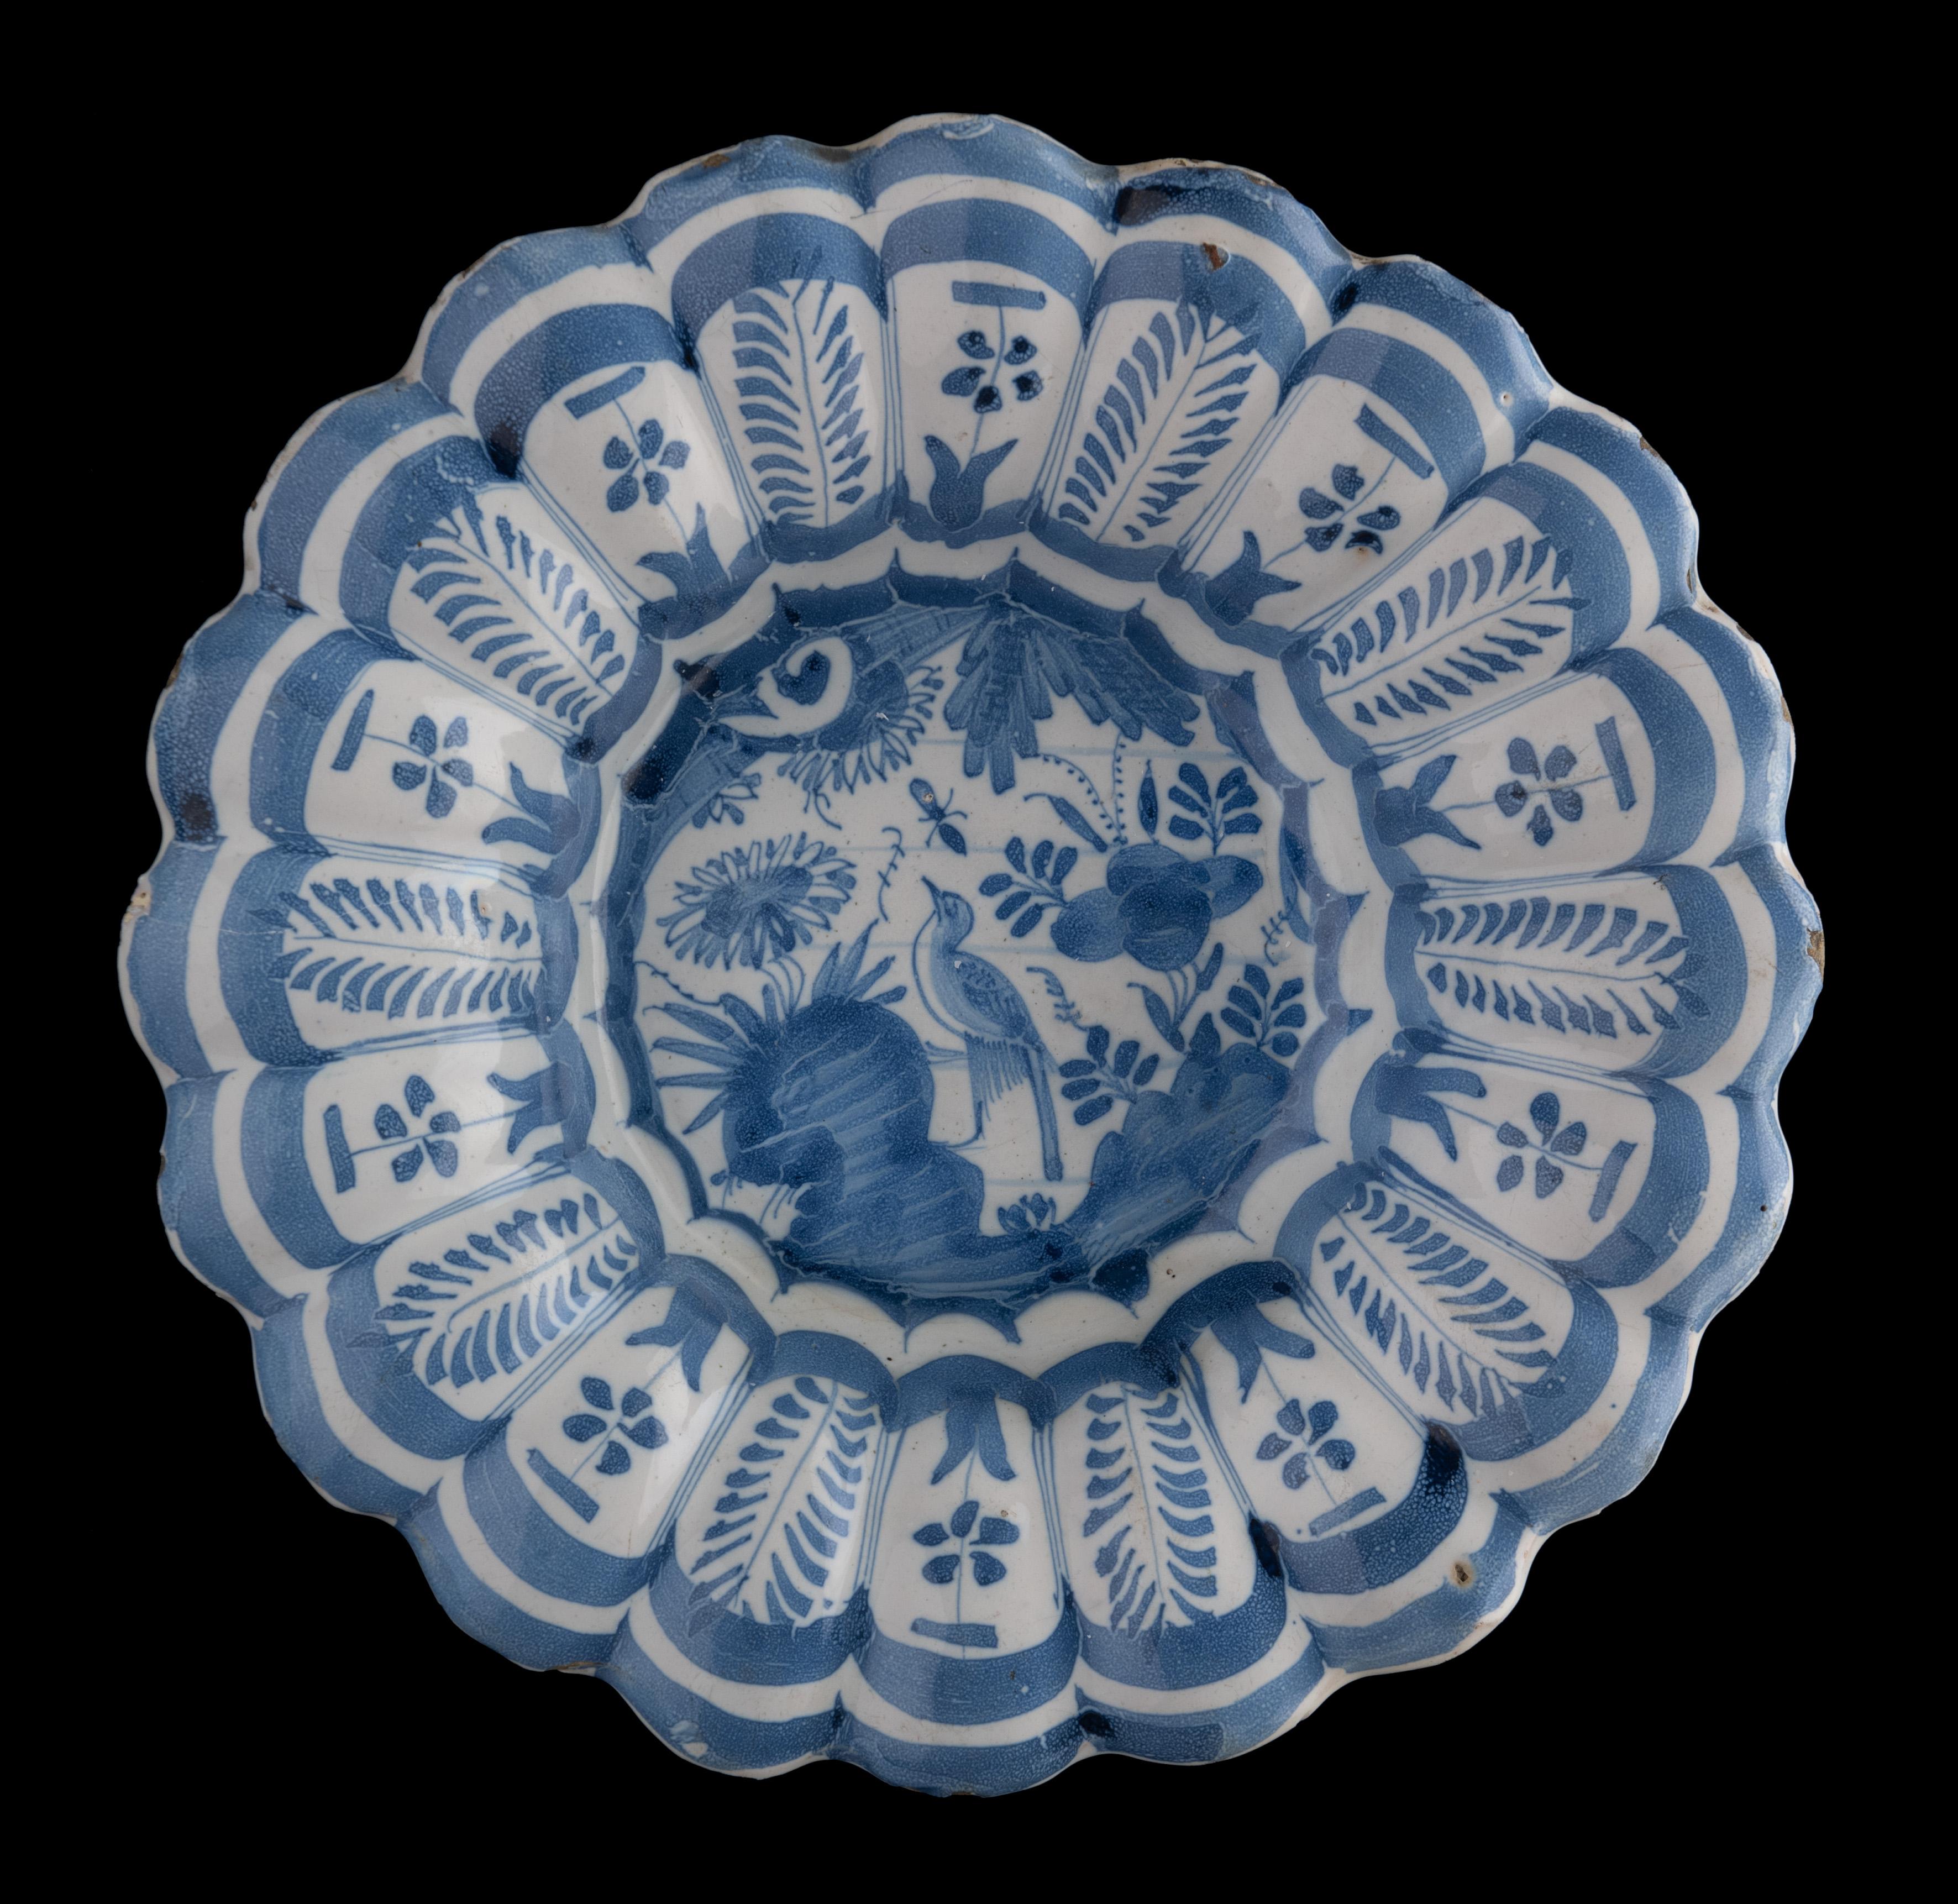 Blue and white chinoiserie lobed dish
The Netherlands, 1630-1650

The blue and white lobed dish is composed of twenty small lobes and is painted in the centre with a floral chinoiserie decoration of a bird on a rock among flowers and plants. The